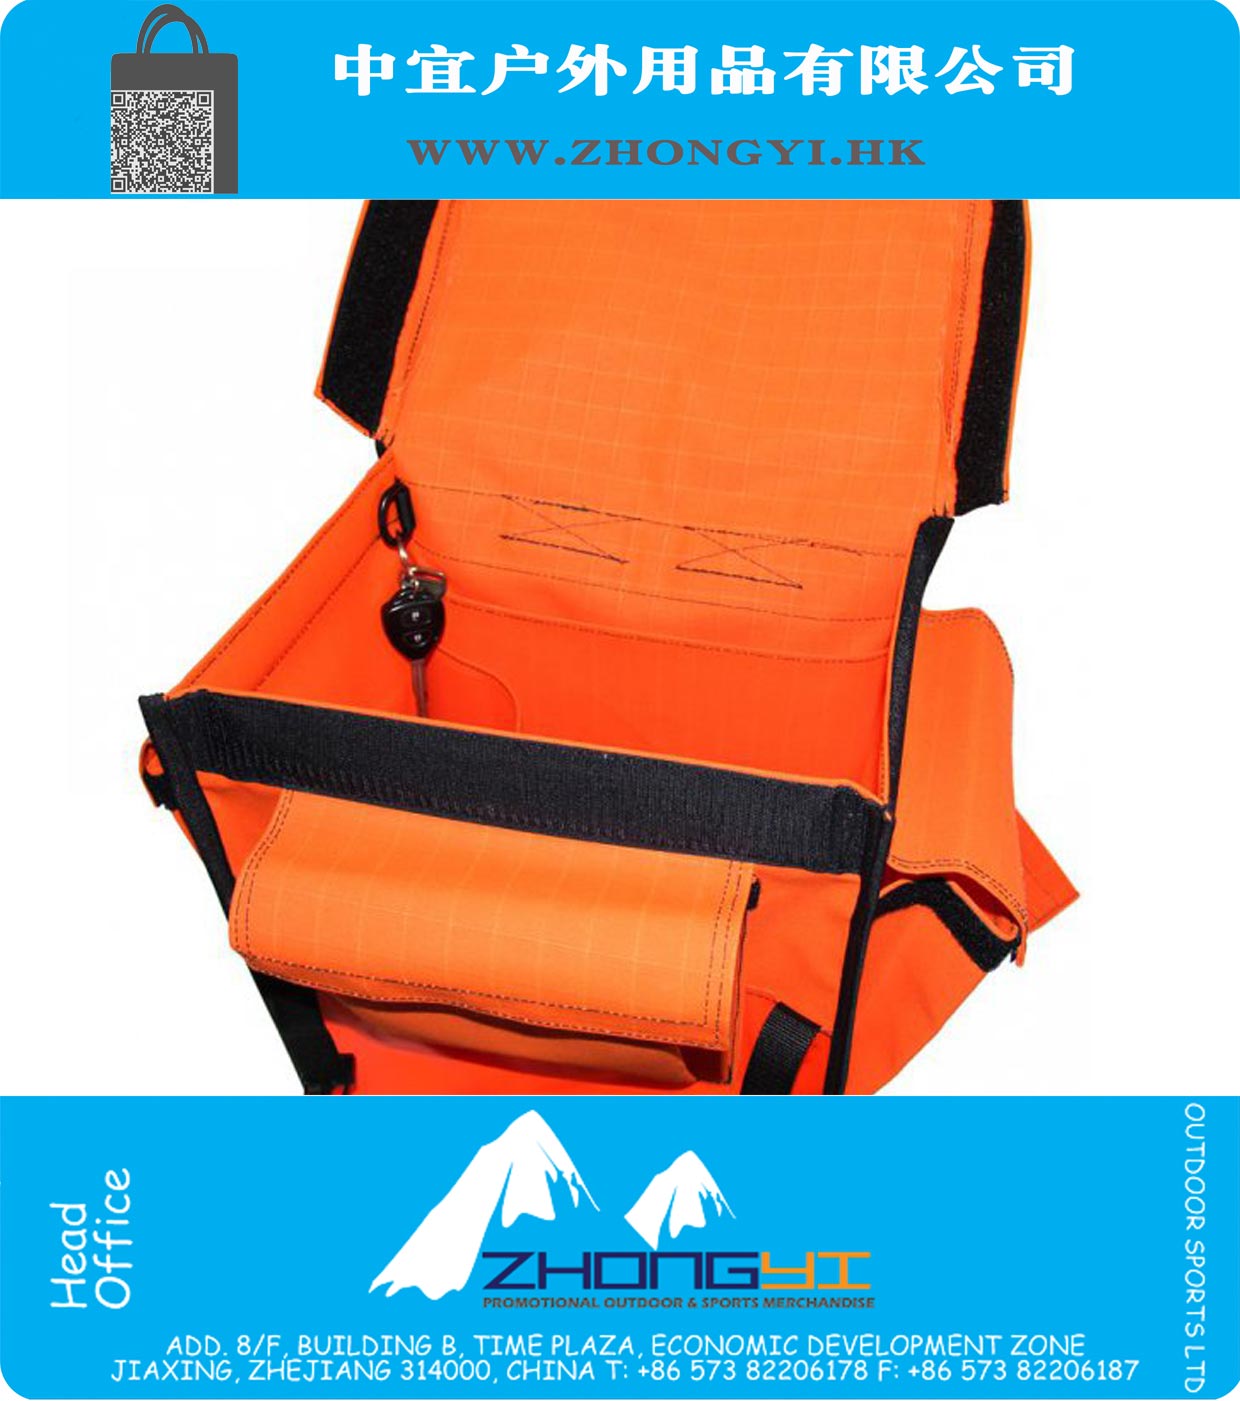 High Visibility Canvas Rip Resistant Bag